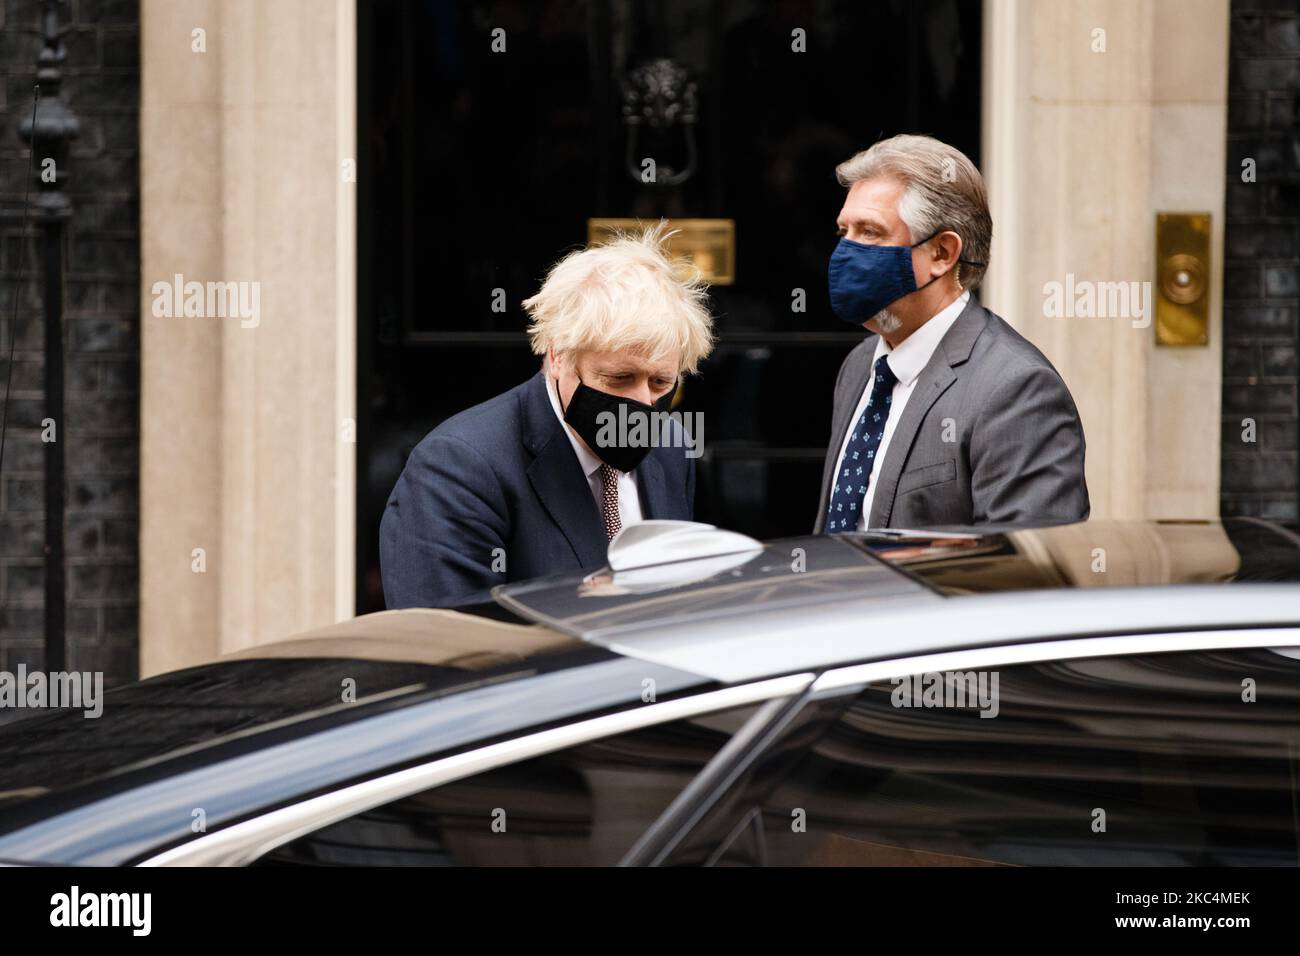 British Prime Minister Boris Johnson, Conservative Party leader and MP for Uxbridge and South Ruislip, wears a face mask leaving 10 Downing Street in London, England, on November 26, 2020. Johnson has been self-isolating for the last two weeks following notification by the National Health Service's 'track and trace' programme of contact at a Downing Street function with a fellow Conservative Party MP who later tested positive for coronavirus. The government is today meanwhile announcing which of the three 'tiers' of covid-19 restrictions will apply to local authorities across England at the en Stock Photo